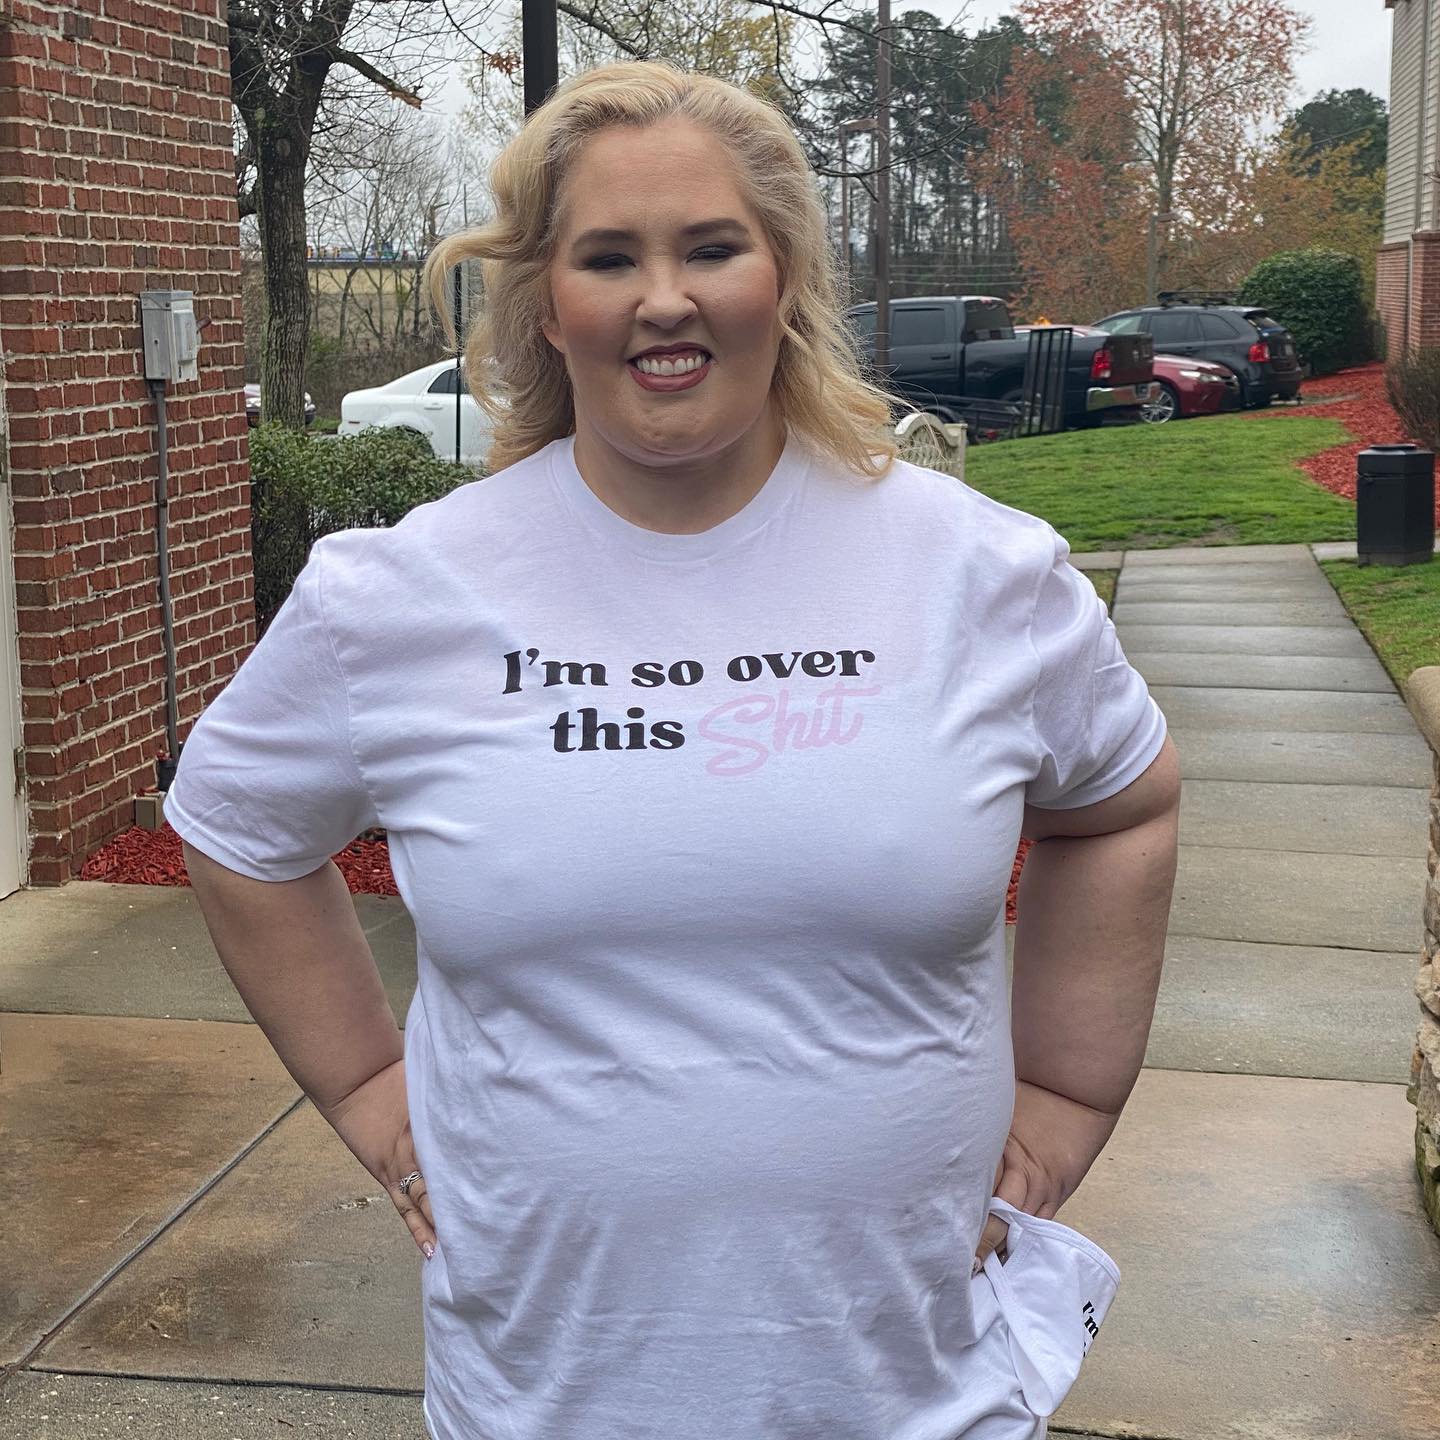 Mama June: Road to Redemption Premiere Date and New Season Drama!